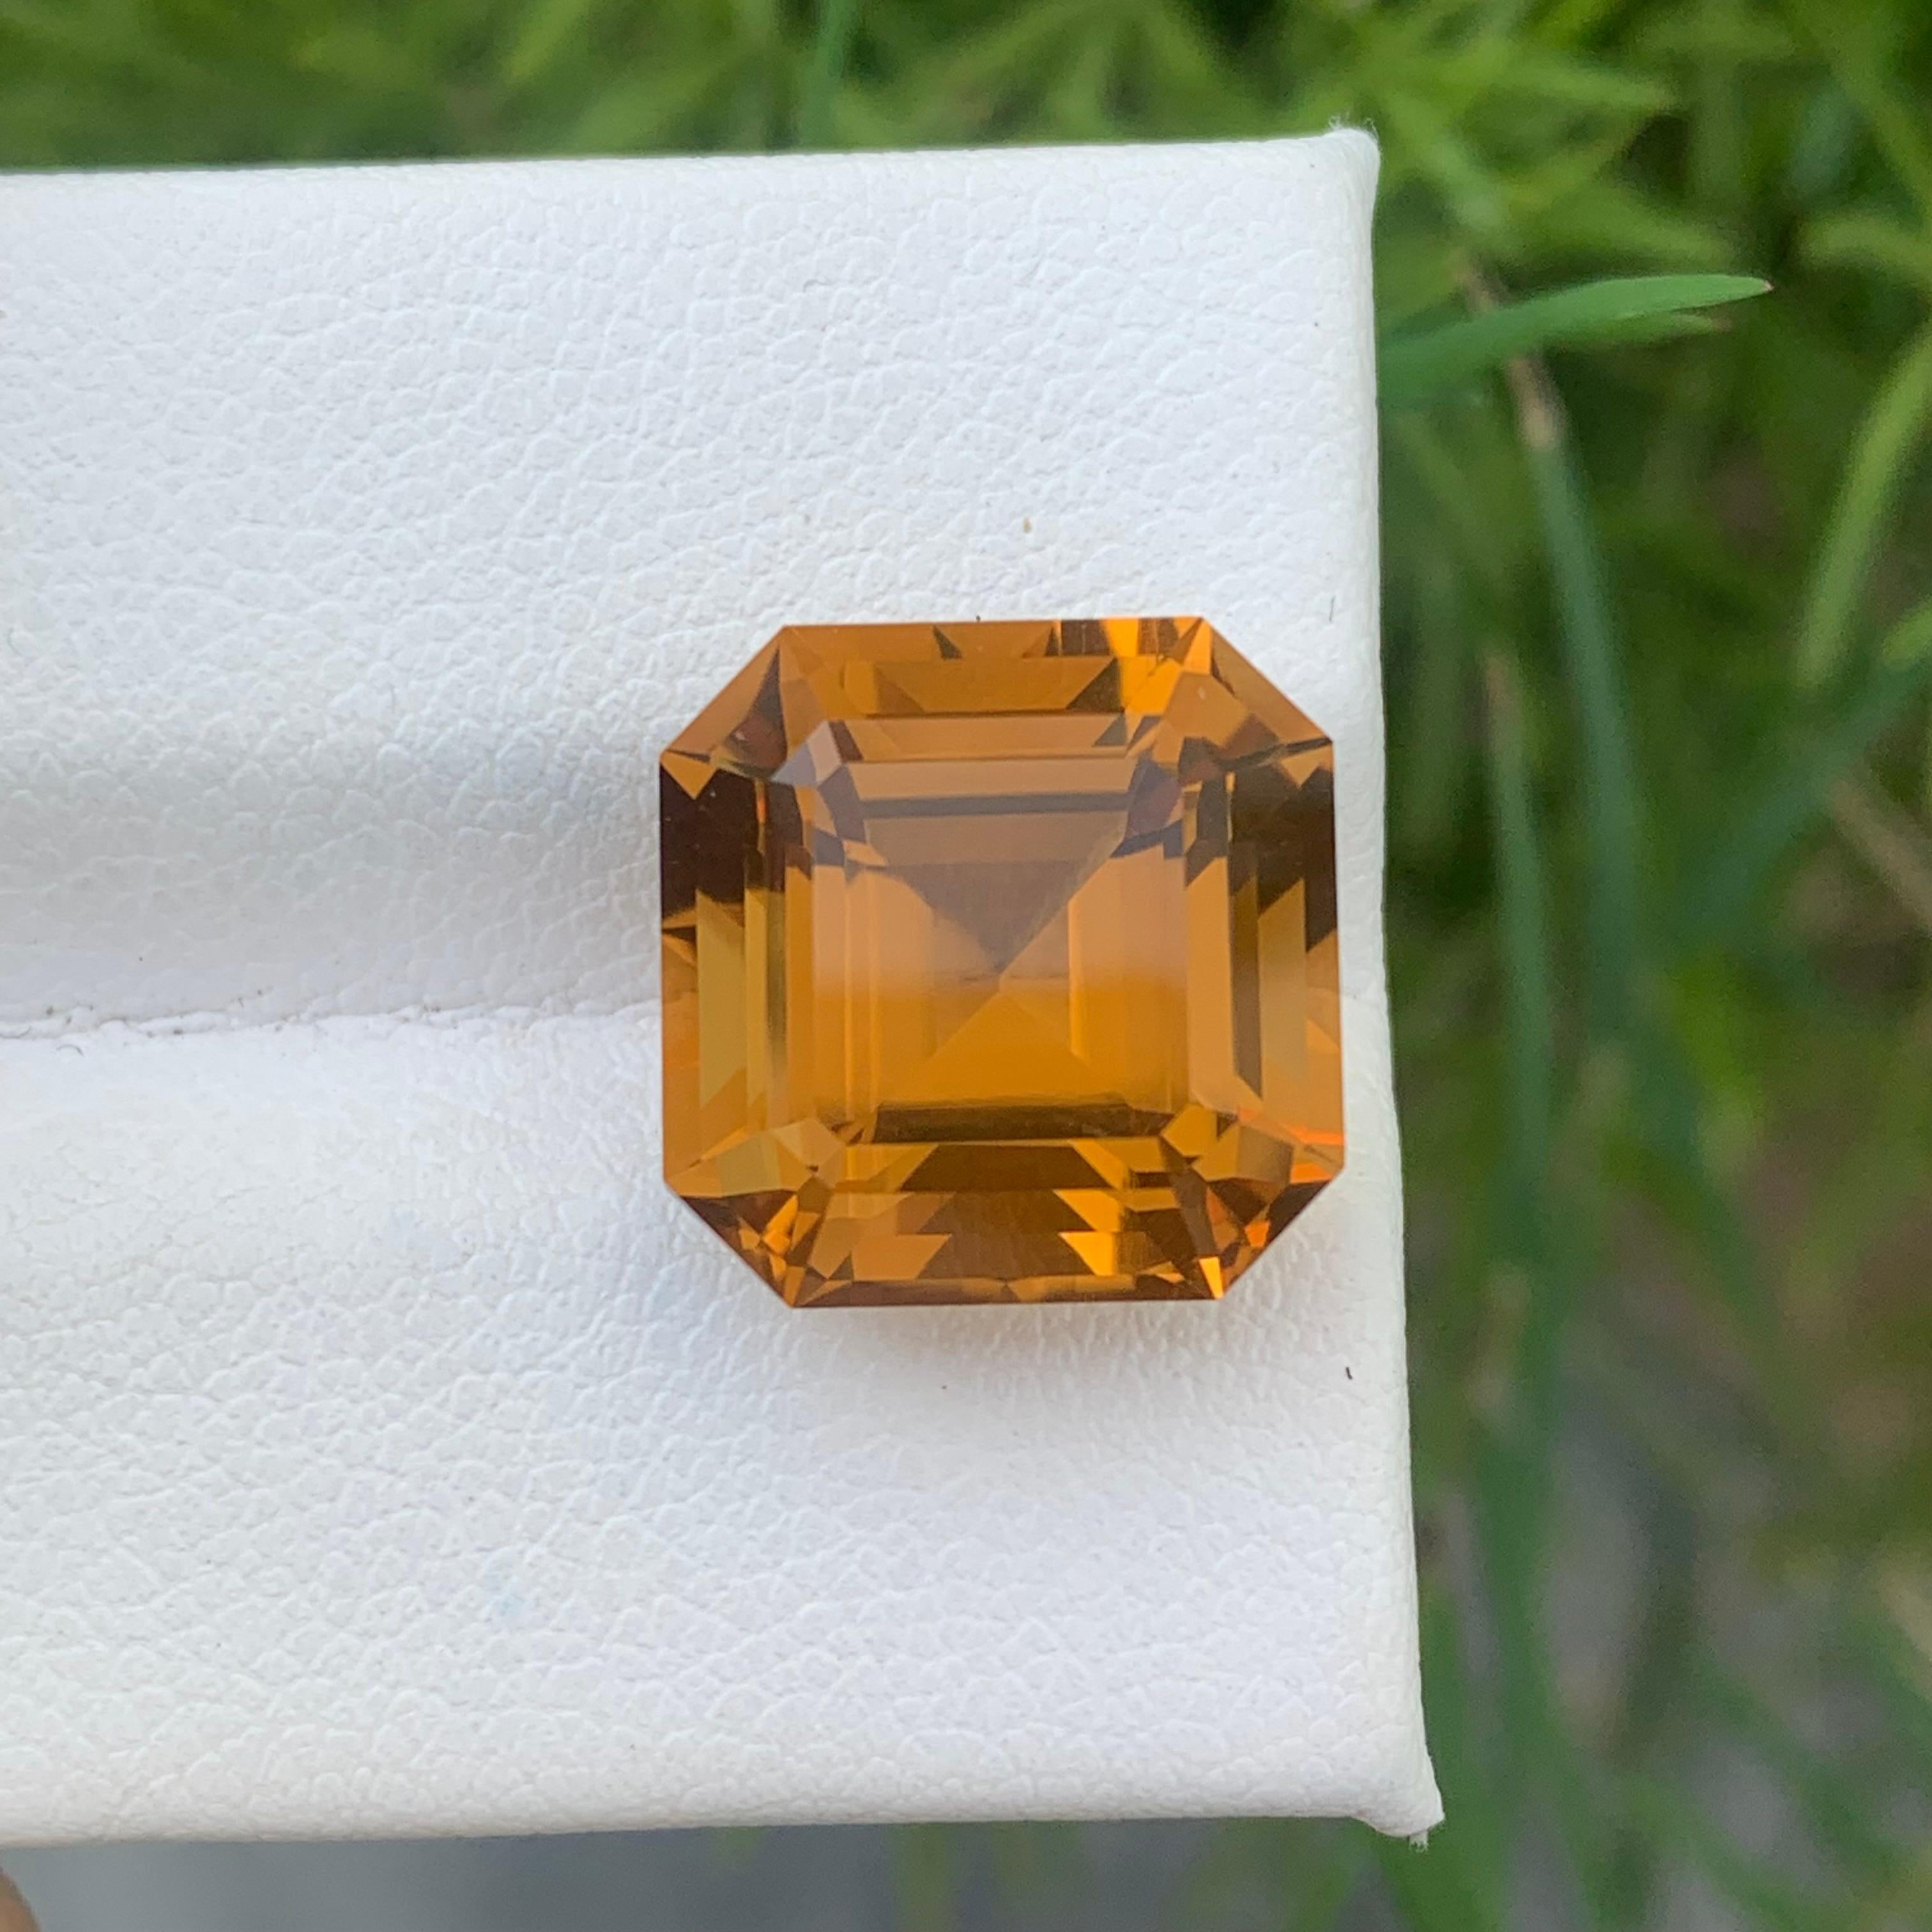 Faceted Citrine
Weight : 10.60 Carats
Dimensions : 13x12.8x10.1 Mm
Clarity : Clean
Origin : Brazil
Color: Brown Yellow
Shape: Asscher
Certificate: On Demand
Month: November
.
The Many Healing Properties of Citrine
Increase Optimism, And Sunny